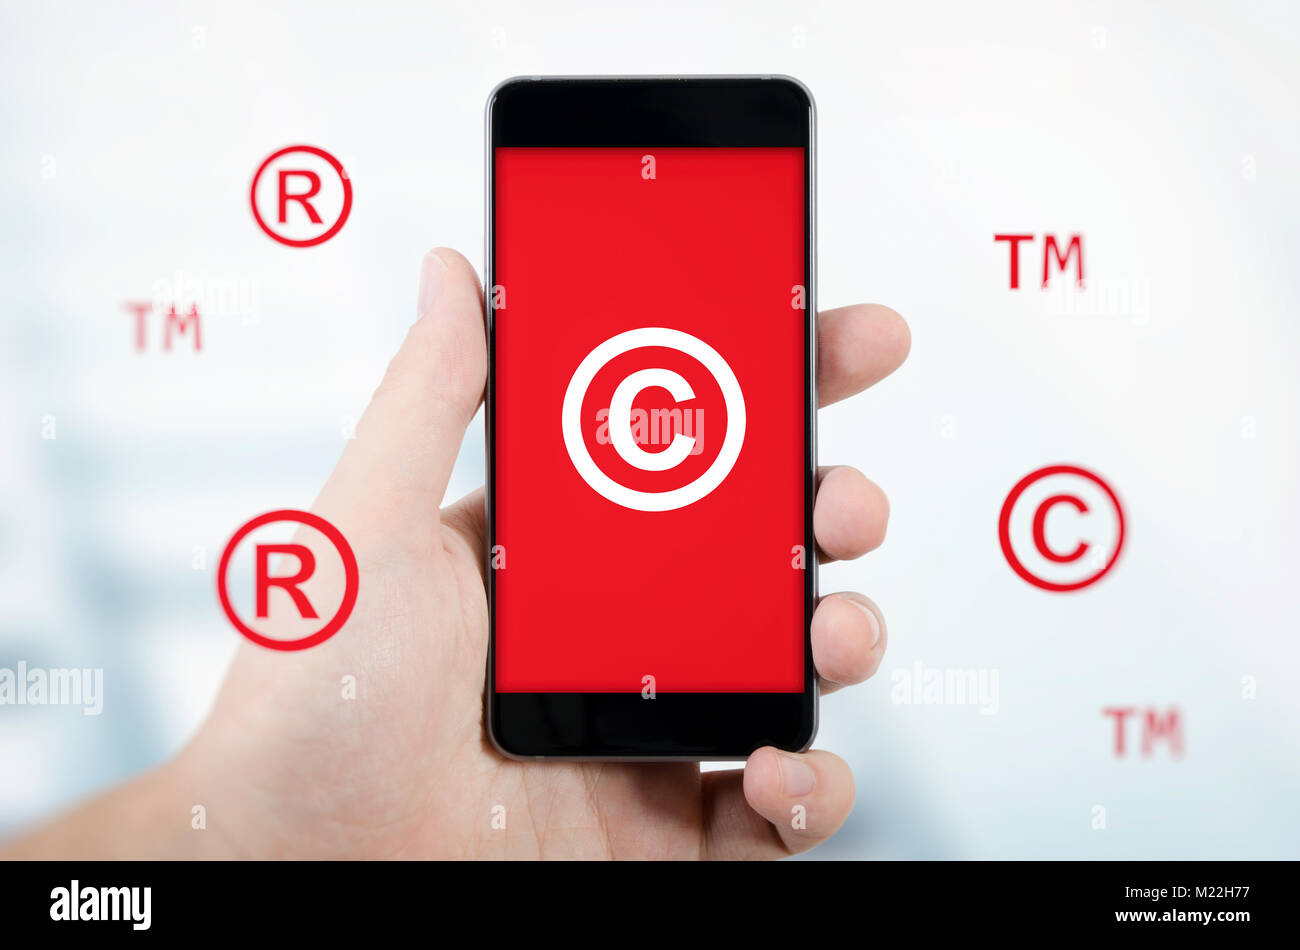 Copyright, trademark symbols flying around smartphone. Security and piracy composition Stock Photo